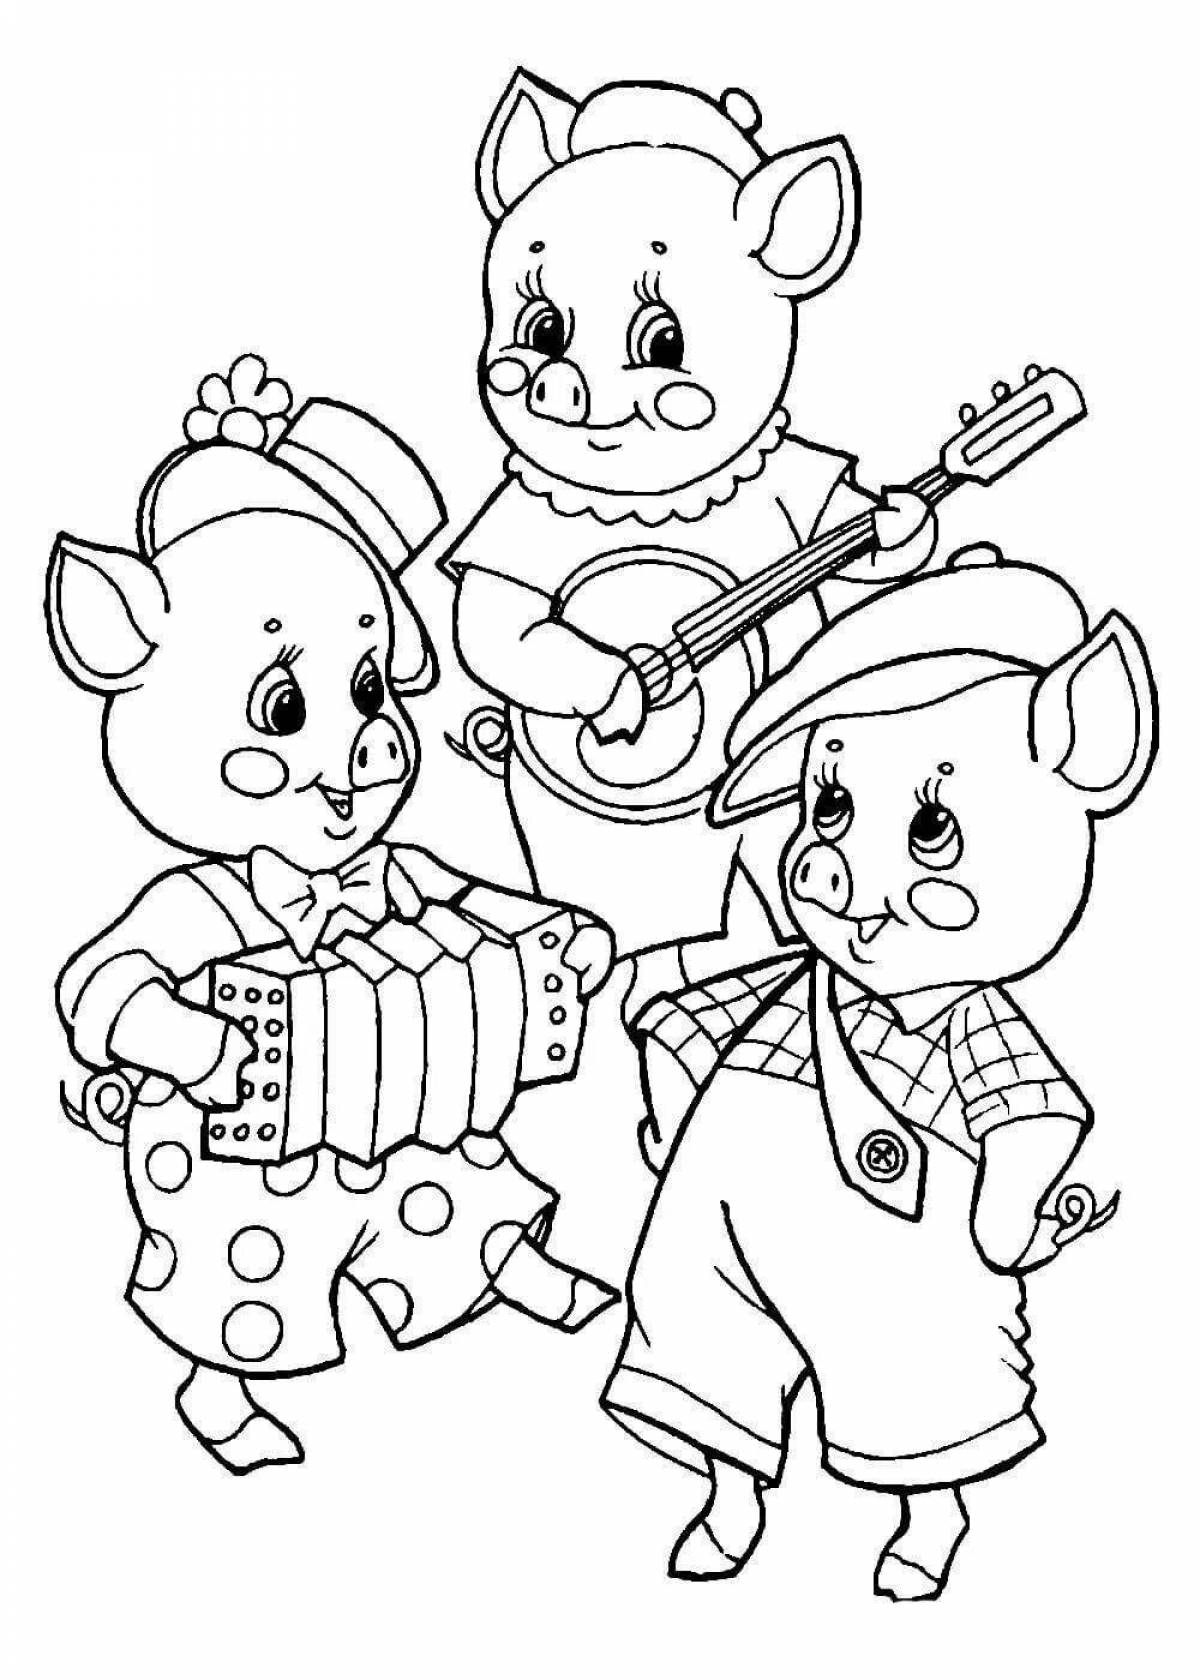 Coloring three little pigs for kids